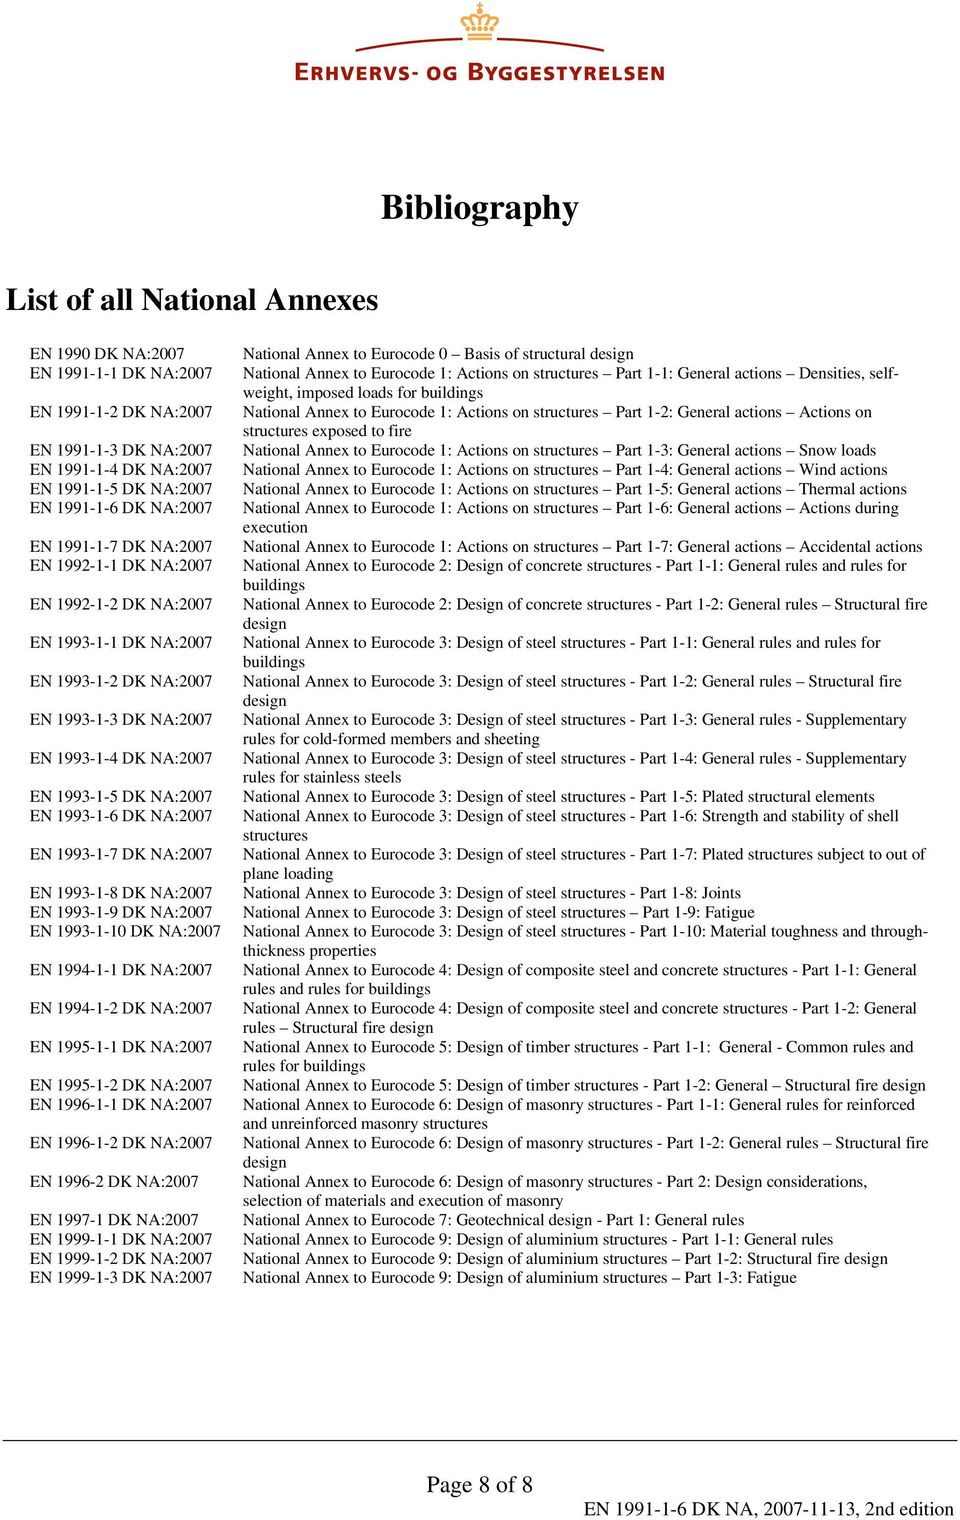 exposed to fire EN 1991-1-3 DK NA:2007 National Annex to Eurocode 1: Actions on structures Part 1-3: General actions Snow loads EN 1991-1-4 DK NA:2007 National Annex to Eurocode 1: Actions on